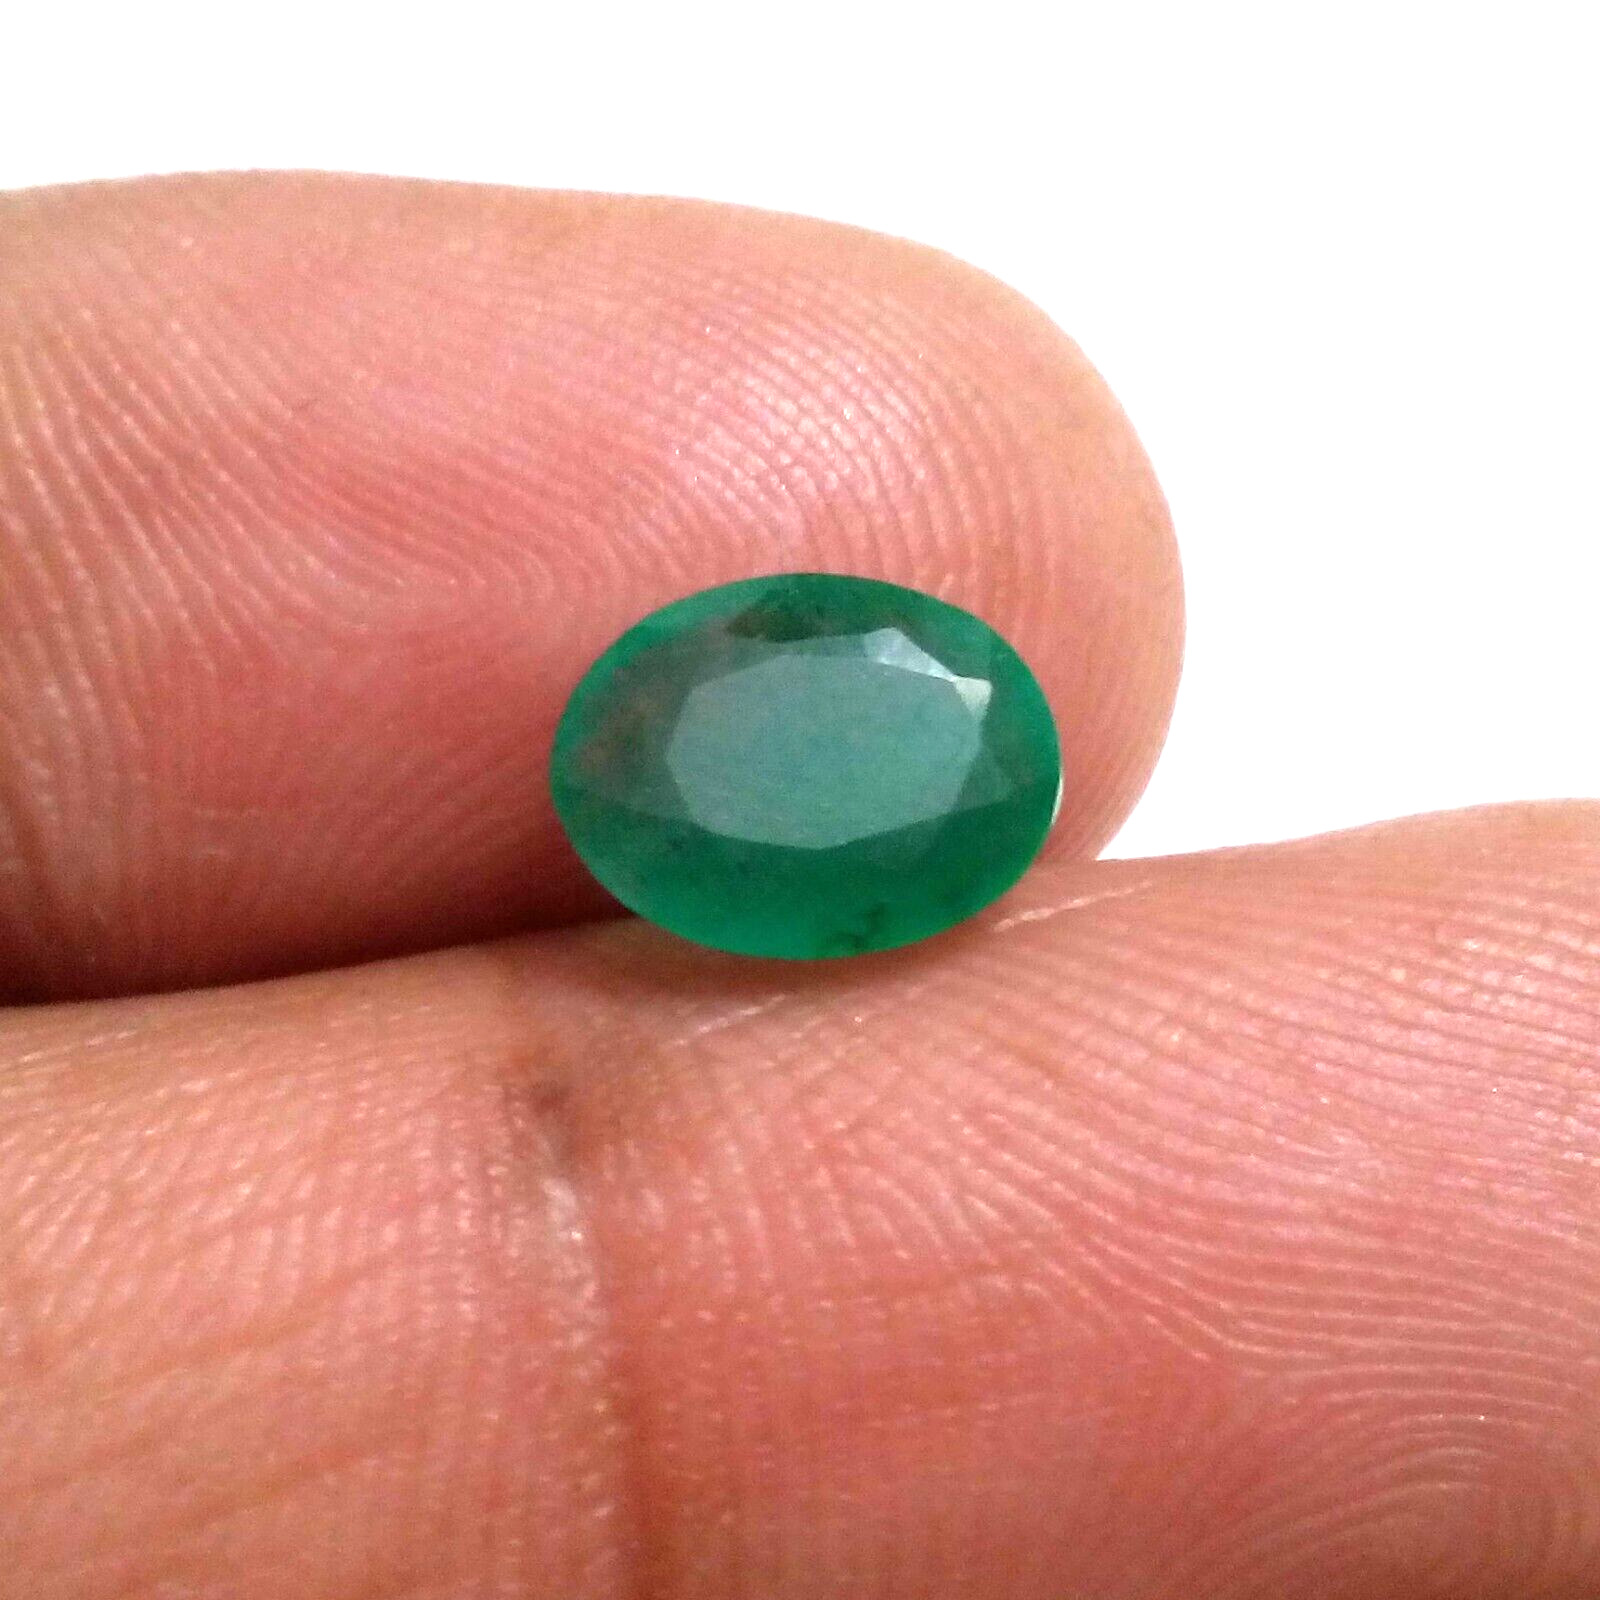 Gorgeous Zambian Emerald Faceted Oval Shape 1.60 Crt Top Green Loose Gemstone